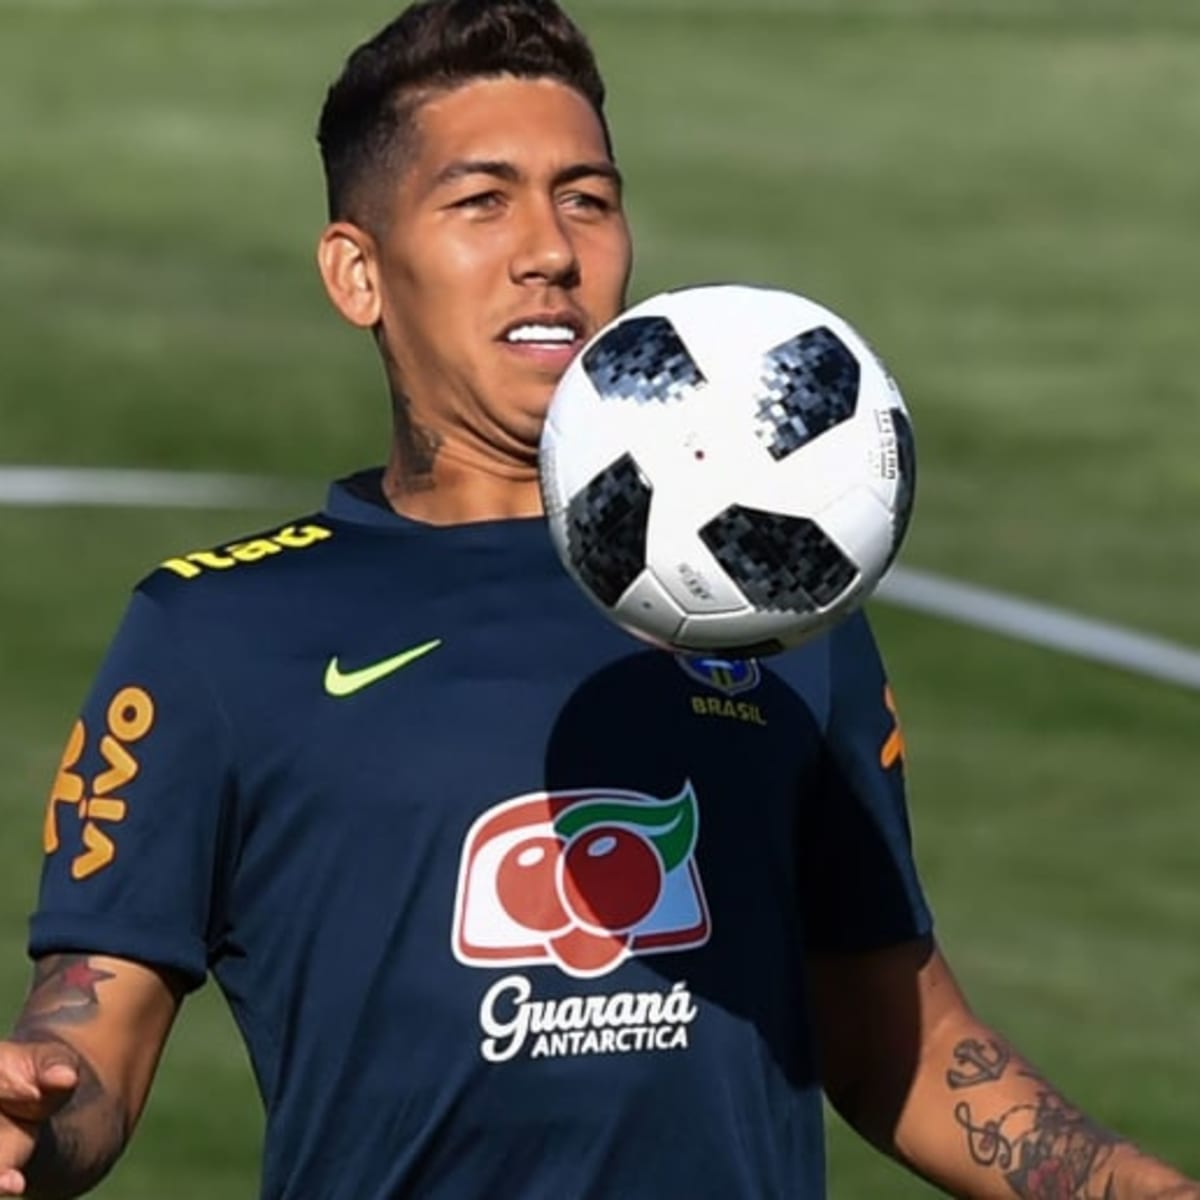 WATCH: Liverpool Star Roberto Firmino Displays His Skills in Awesome  'No-Look Challenge' Video - Sports Illustrated